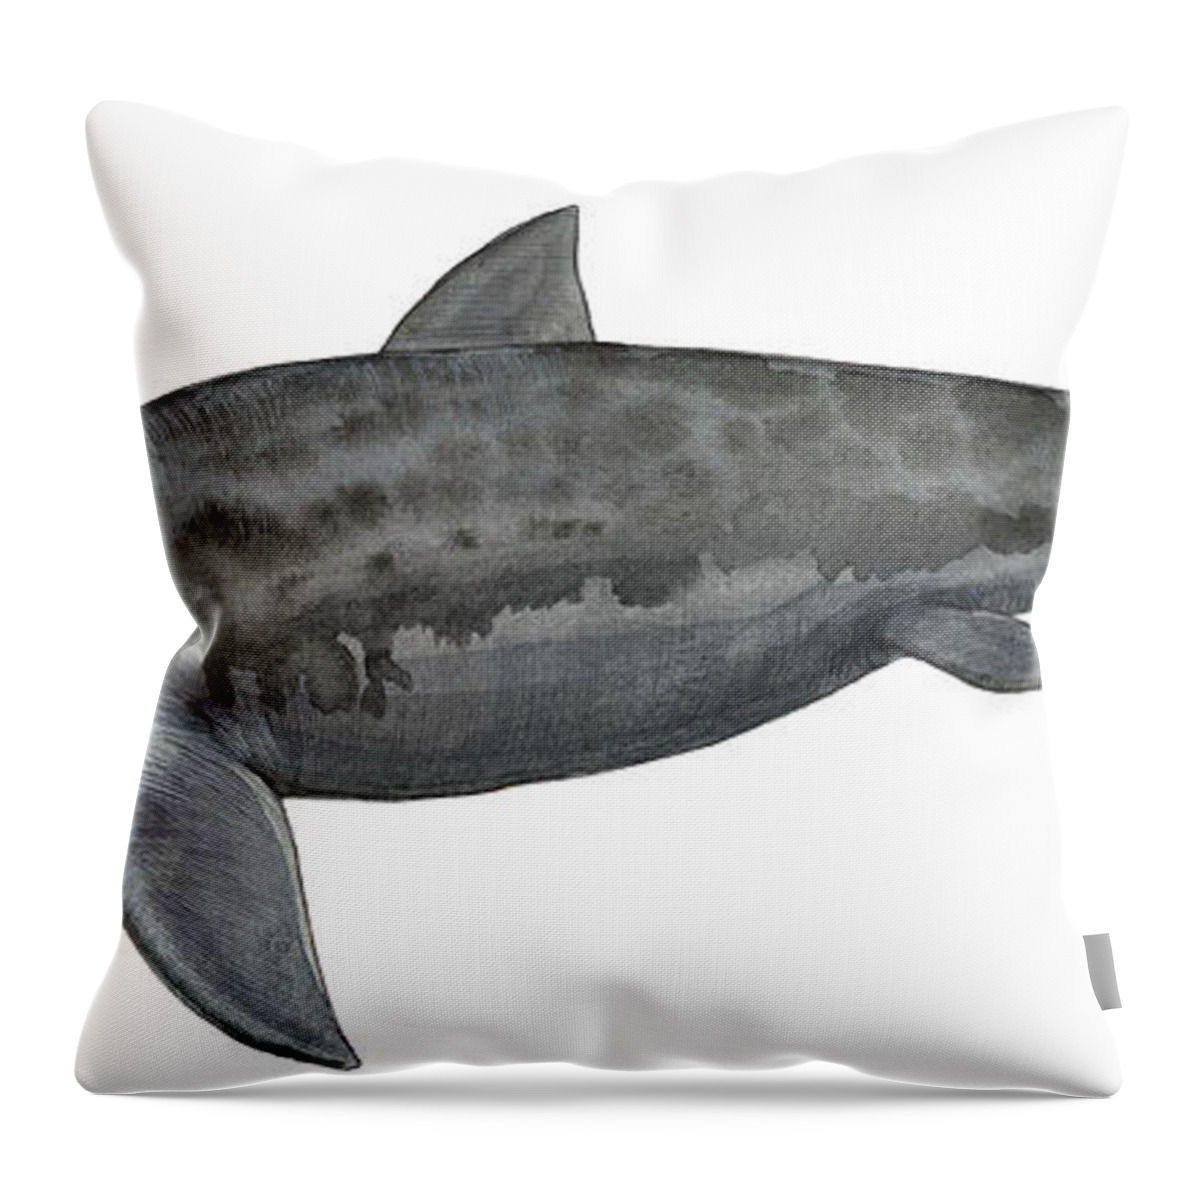 Horizontal Throw Pillow featuring the digital art Illustration Of A Prehistoric #1 by Sergey Krasovskiy